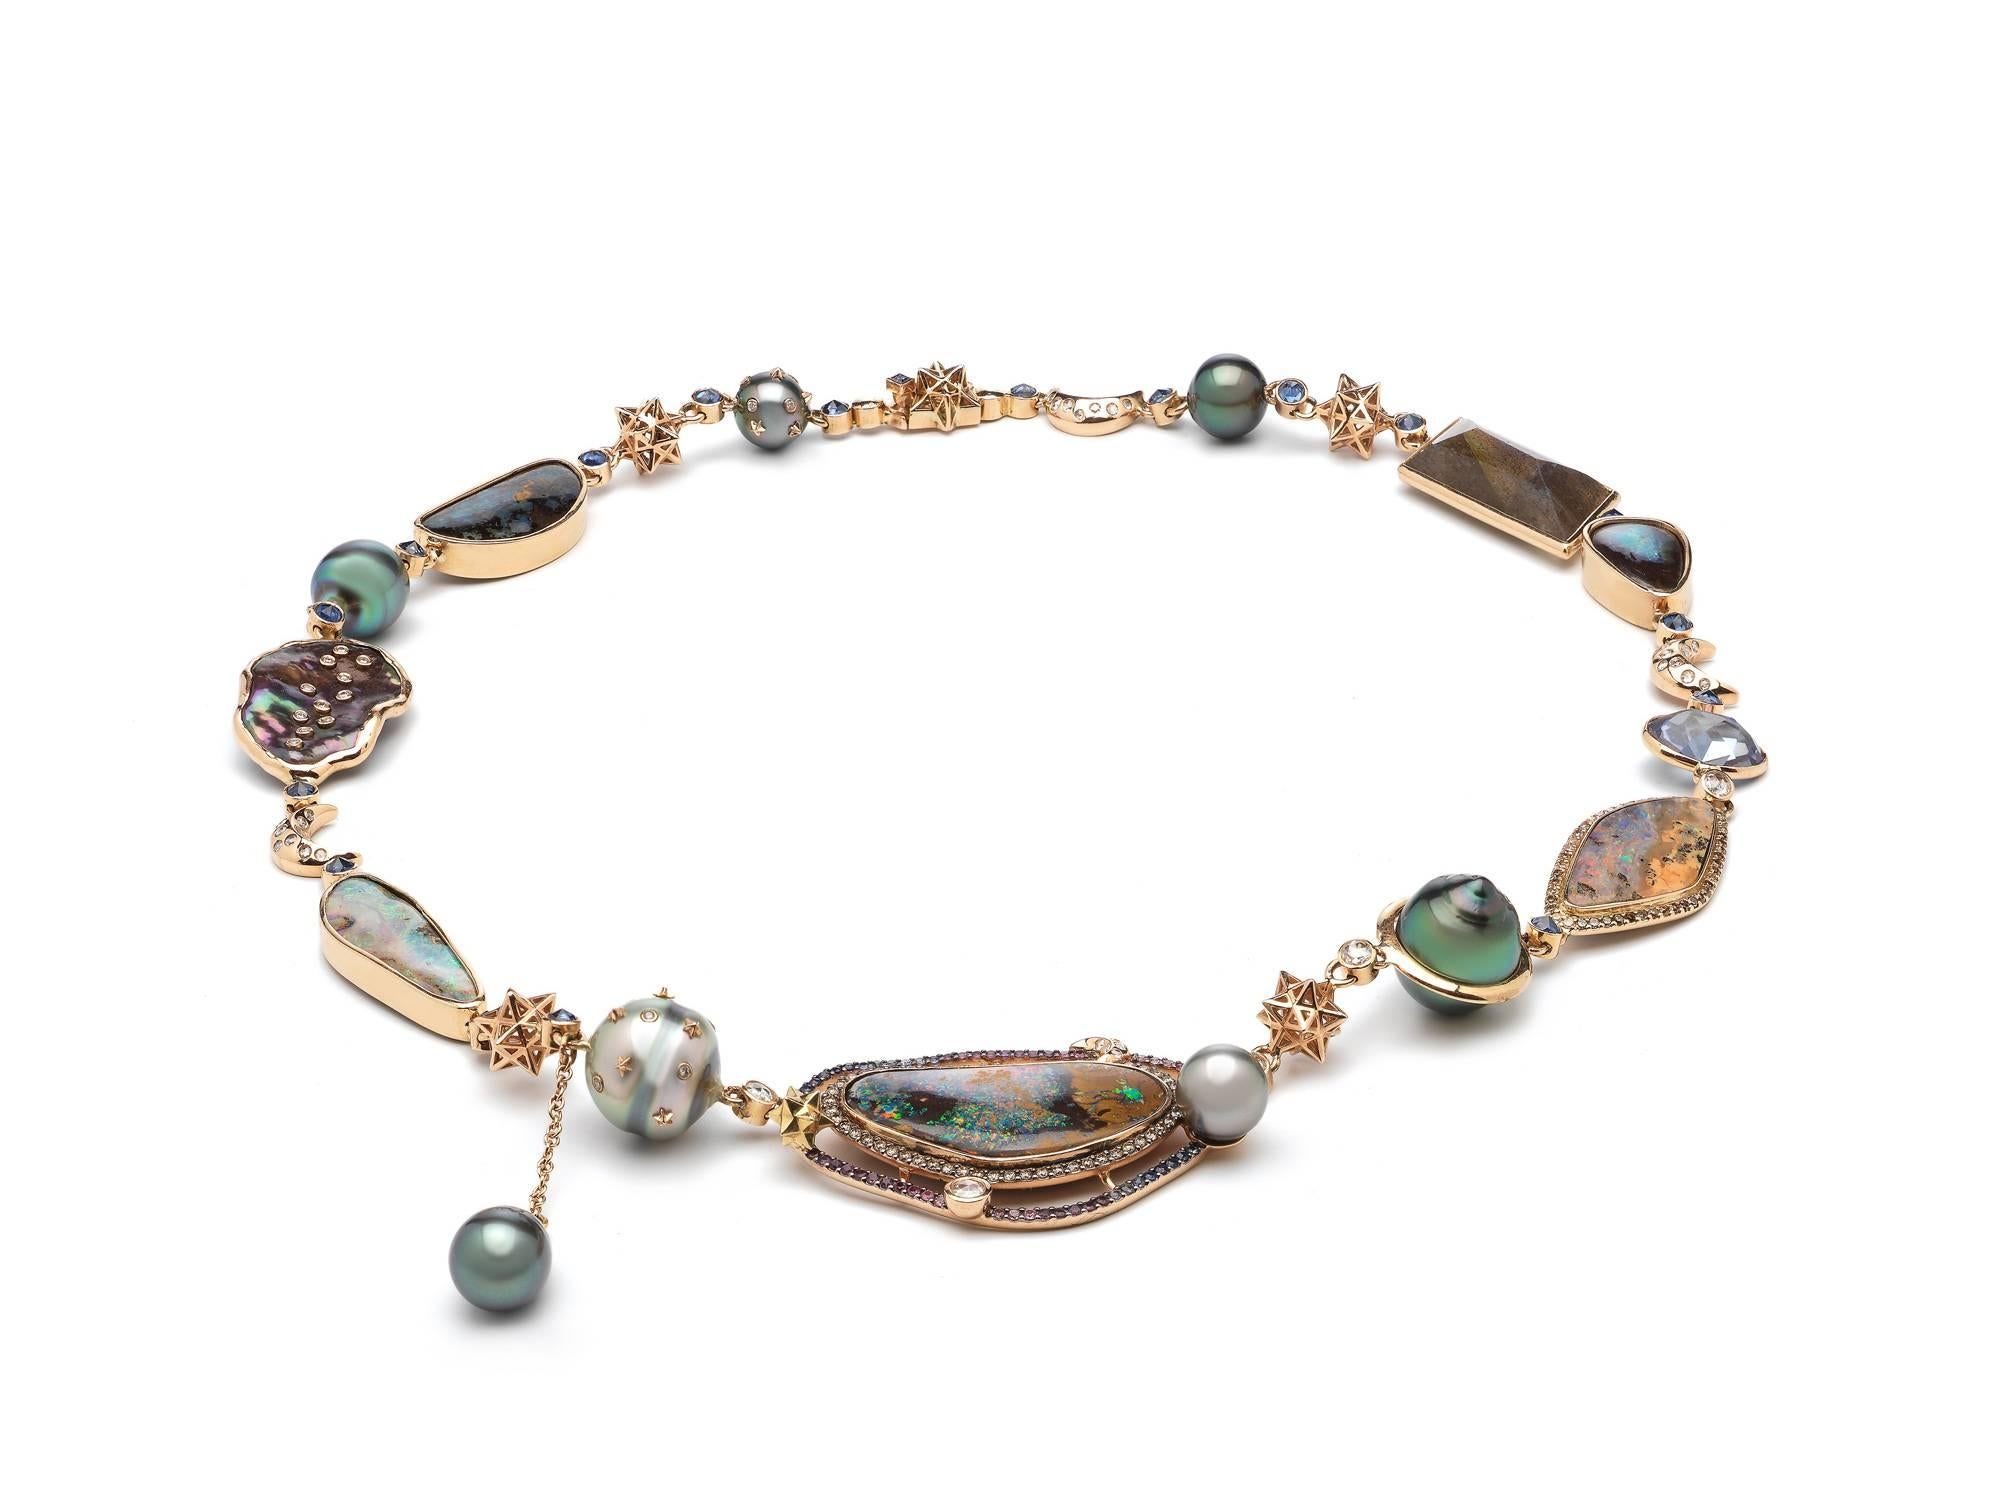 The Galaxy Necklace is made of 18ct rosé gold, white diamonds, opals, blue sapphires, tourmaline and tahitian pearls. A very unique and one of a kind piece. The lock is hidden in a 3D star, and all opals are set in 18 carat golden settings. 